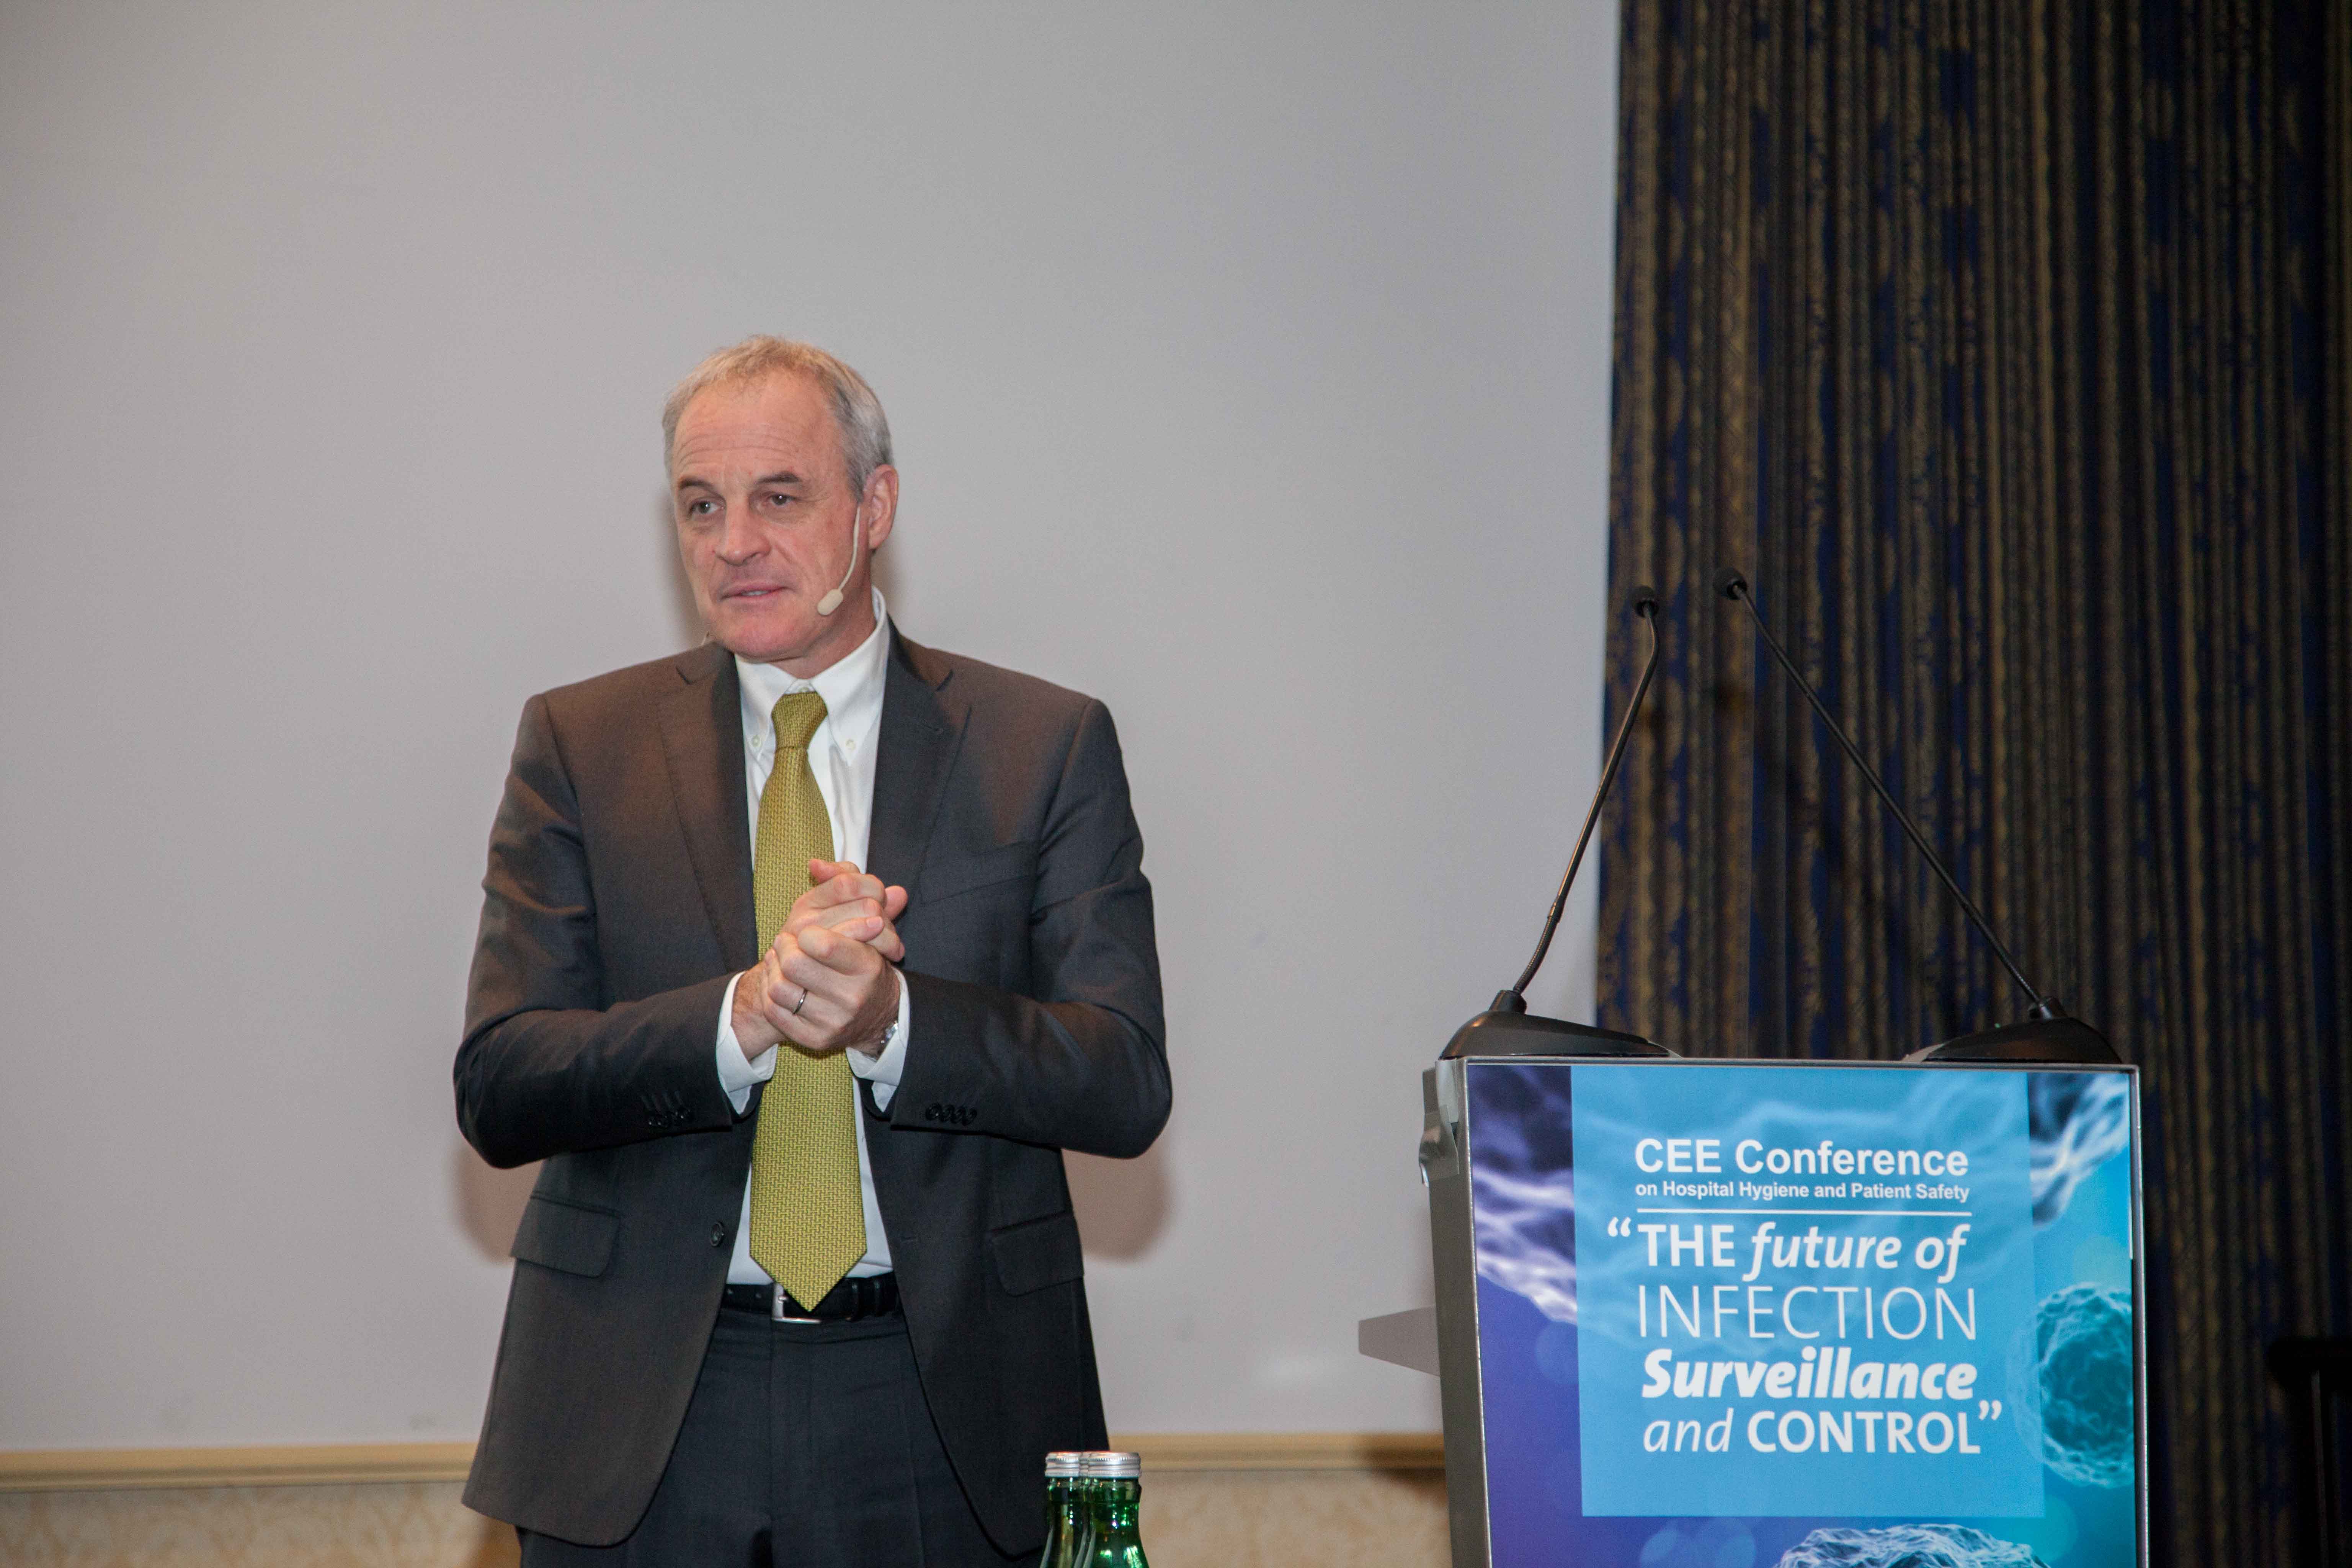 1 - Prof. Didier Pittet, key note lecturer and chairman of the conference